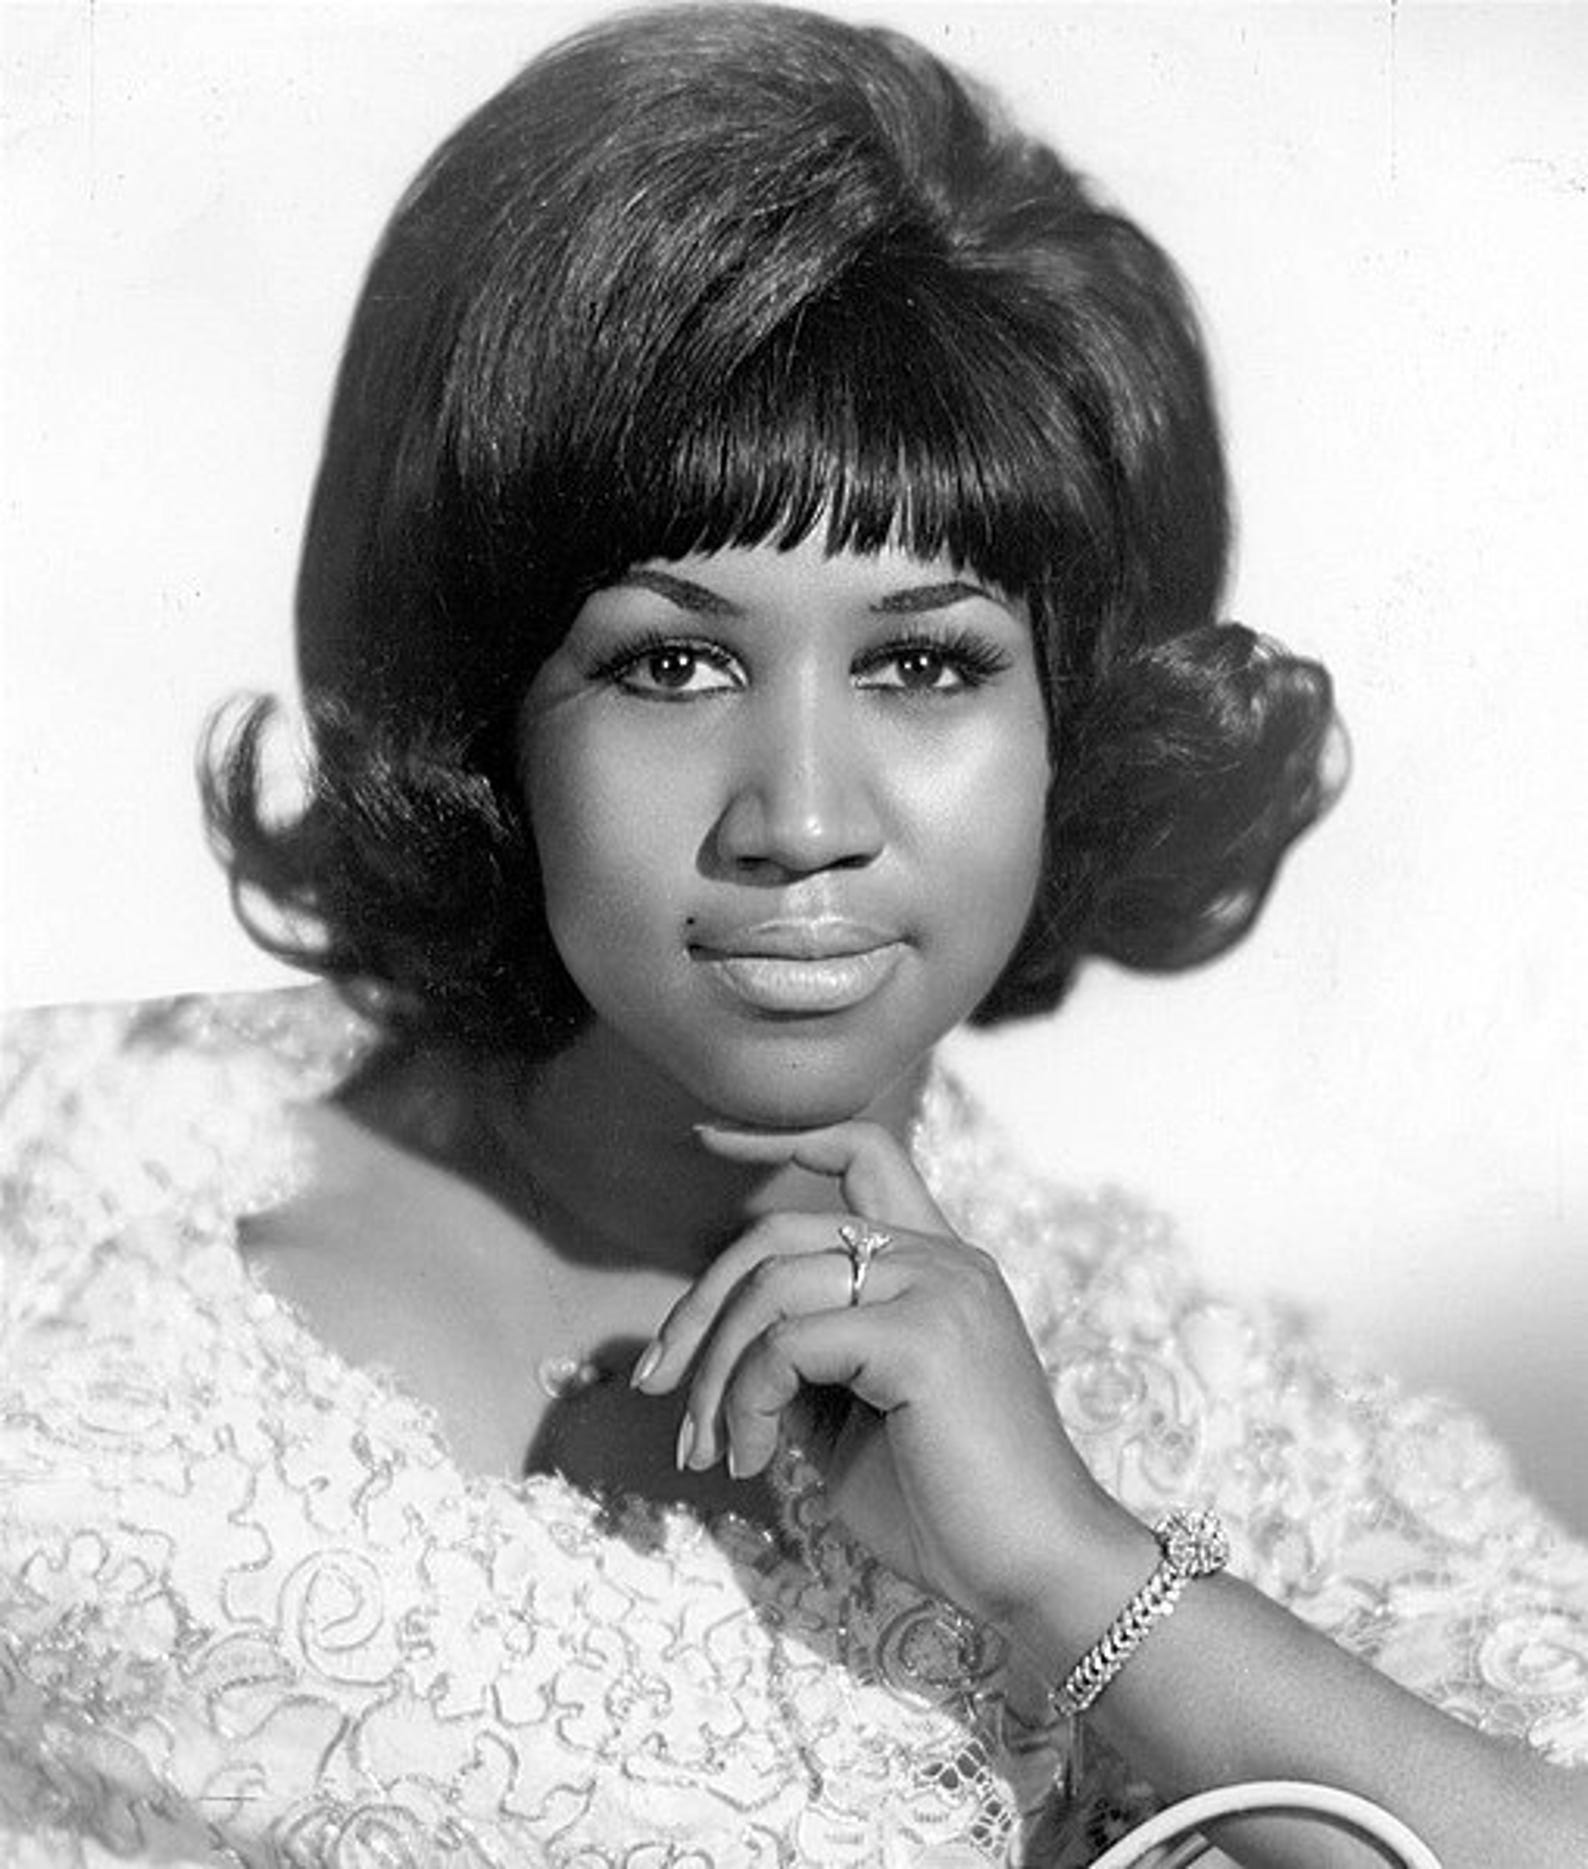 Publicity photo of Aretha Franklin from Billboard, February 17, 1968.